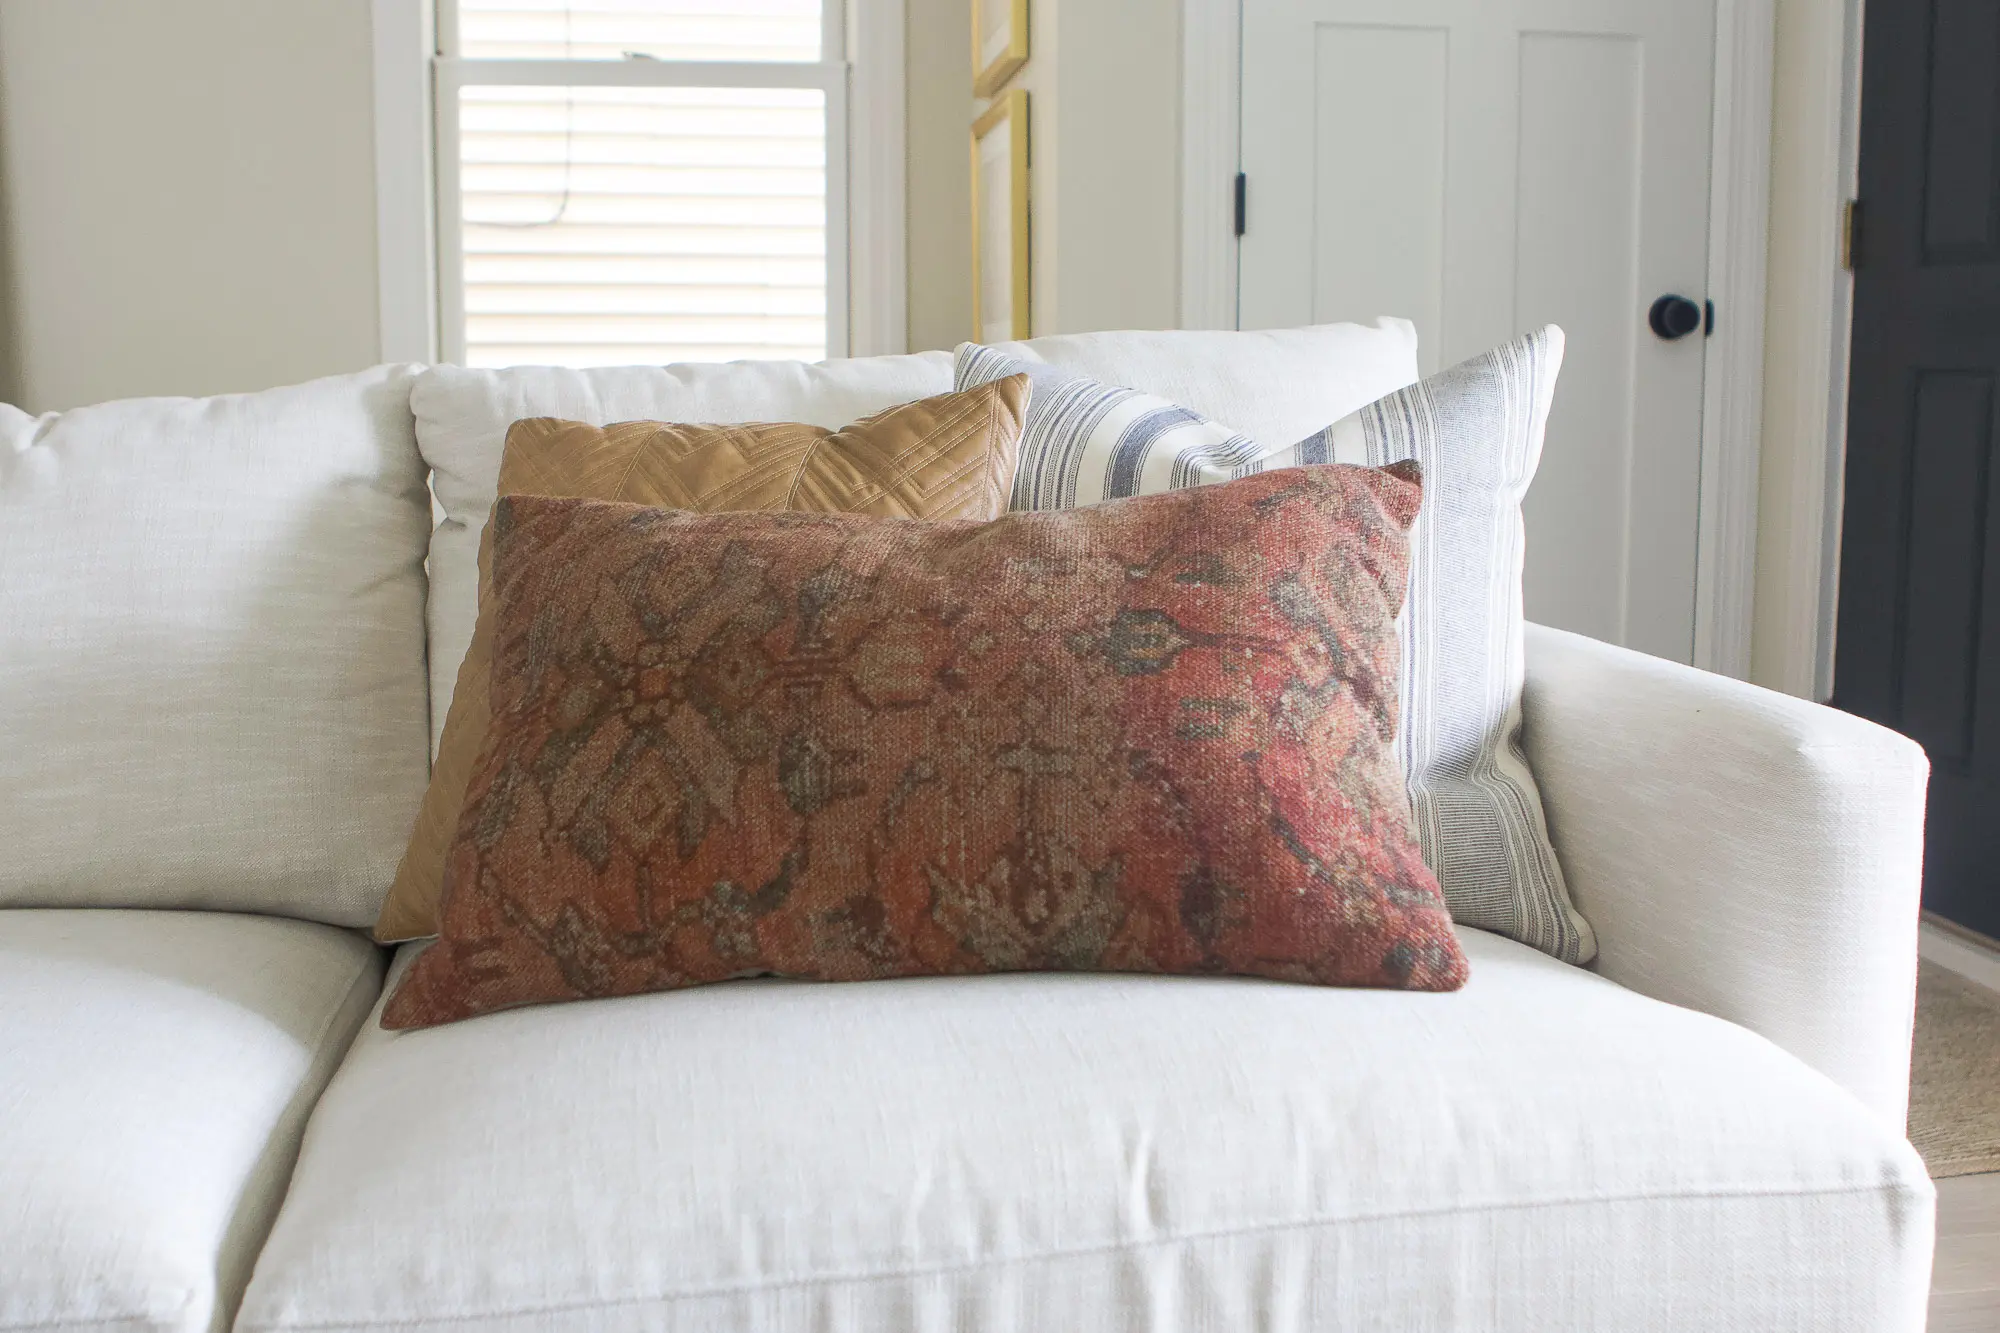 Adding colorful pillows to a neutral couch